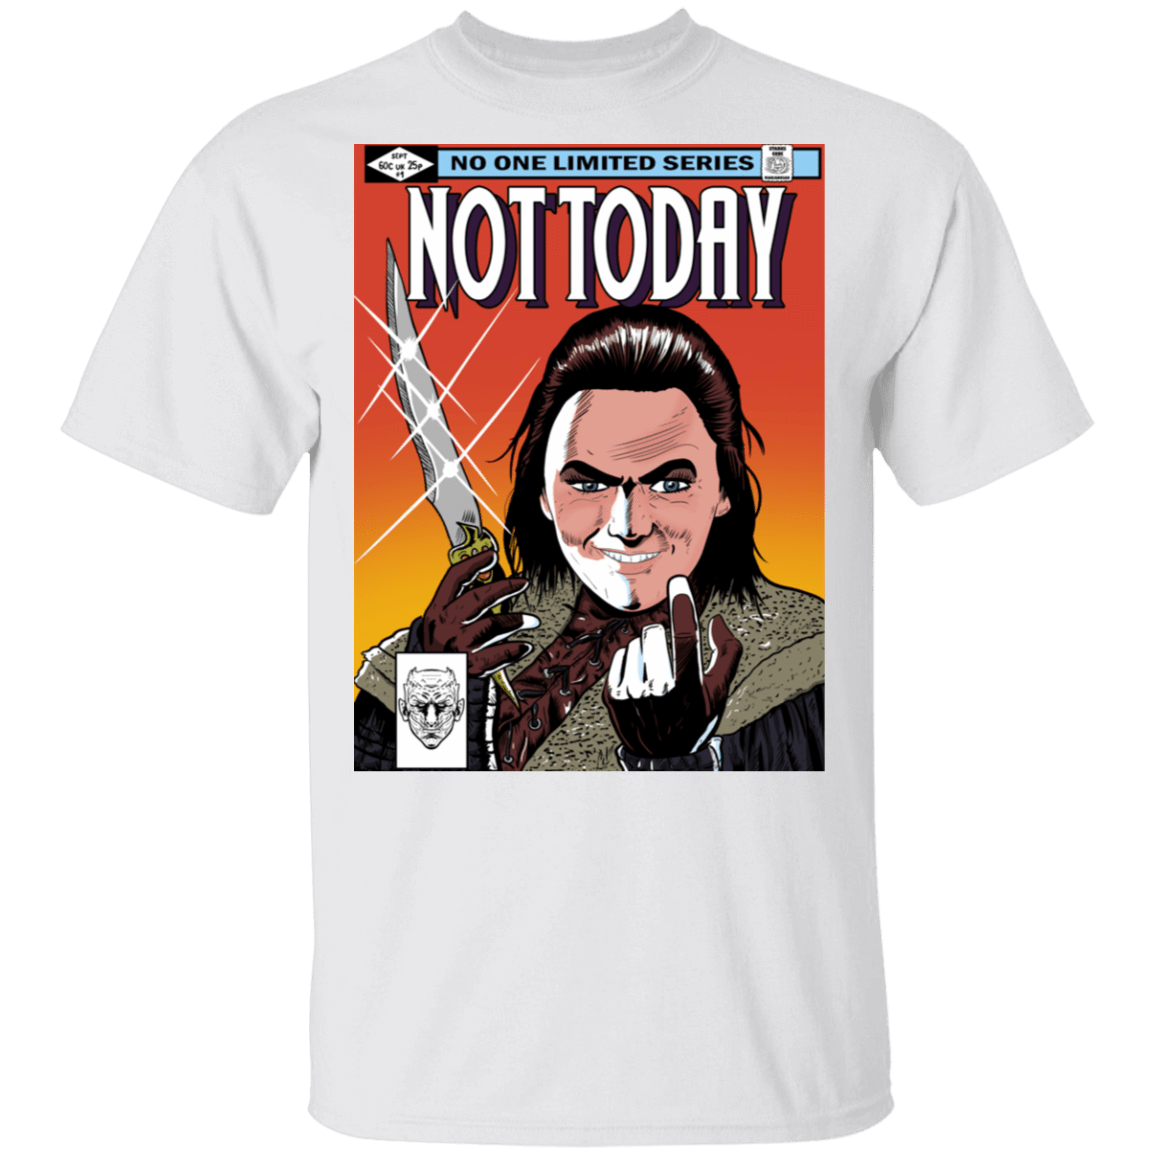 T-Shirts White / S Not Today T-Shirt